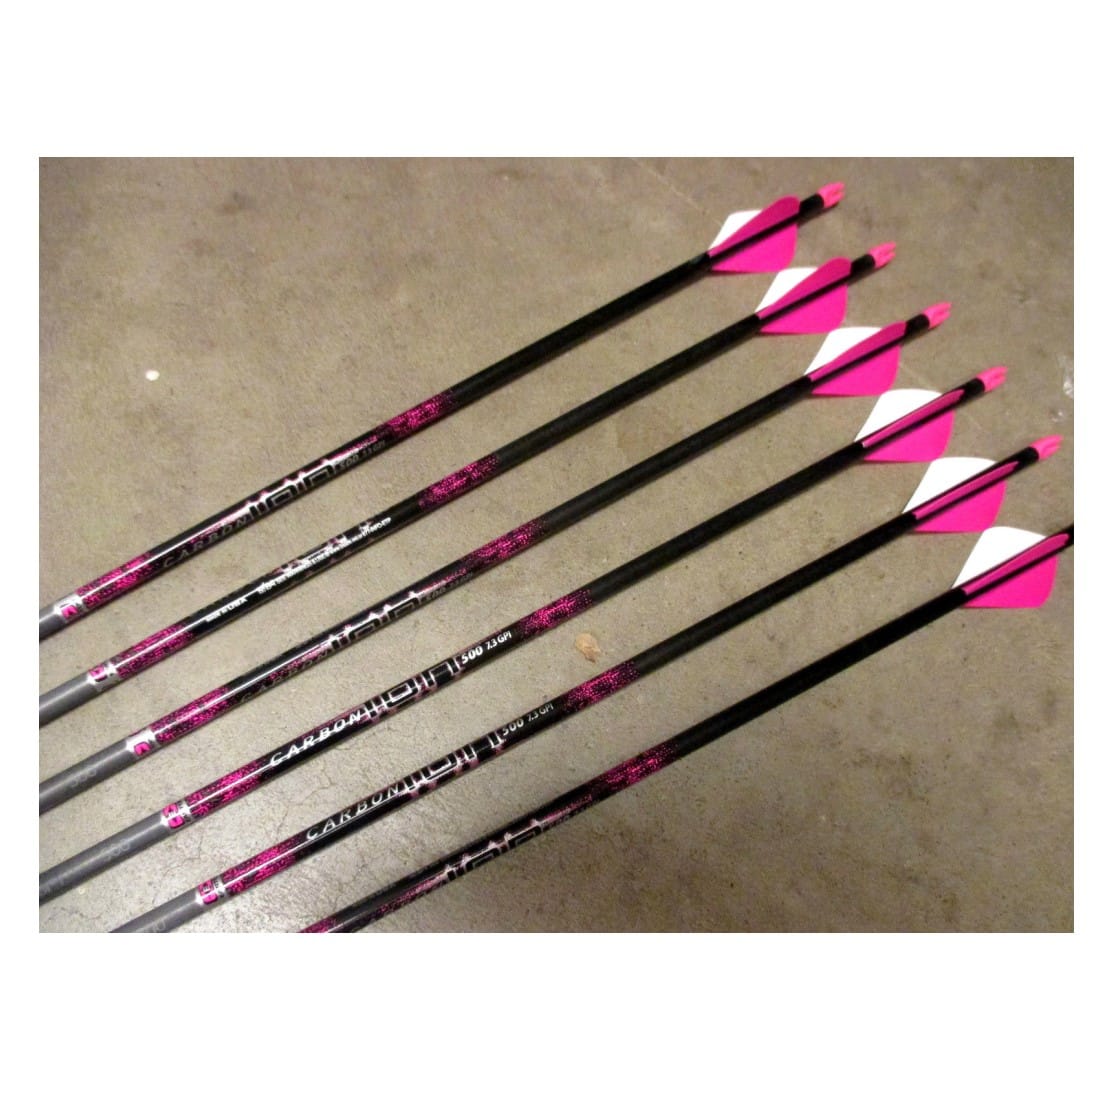 EASTON ION PINK LOW PROFILE CARBON 6 PACK ARROWS - Northwoods Wholesale  Outlet